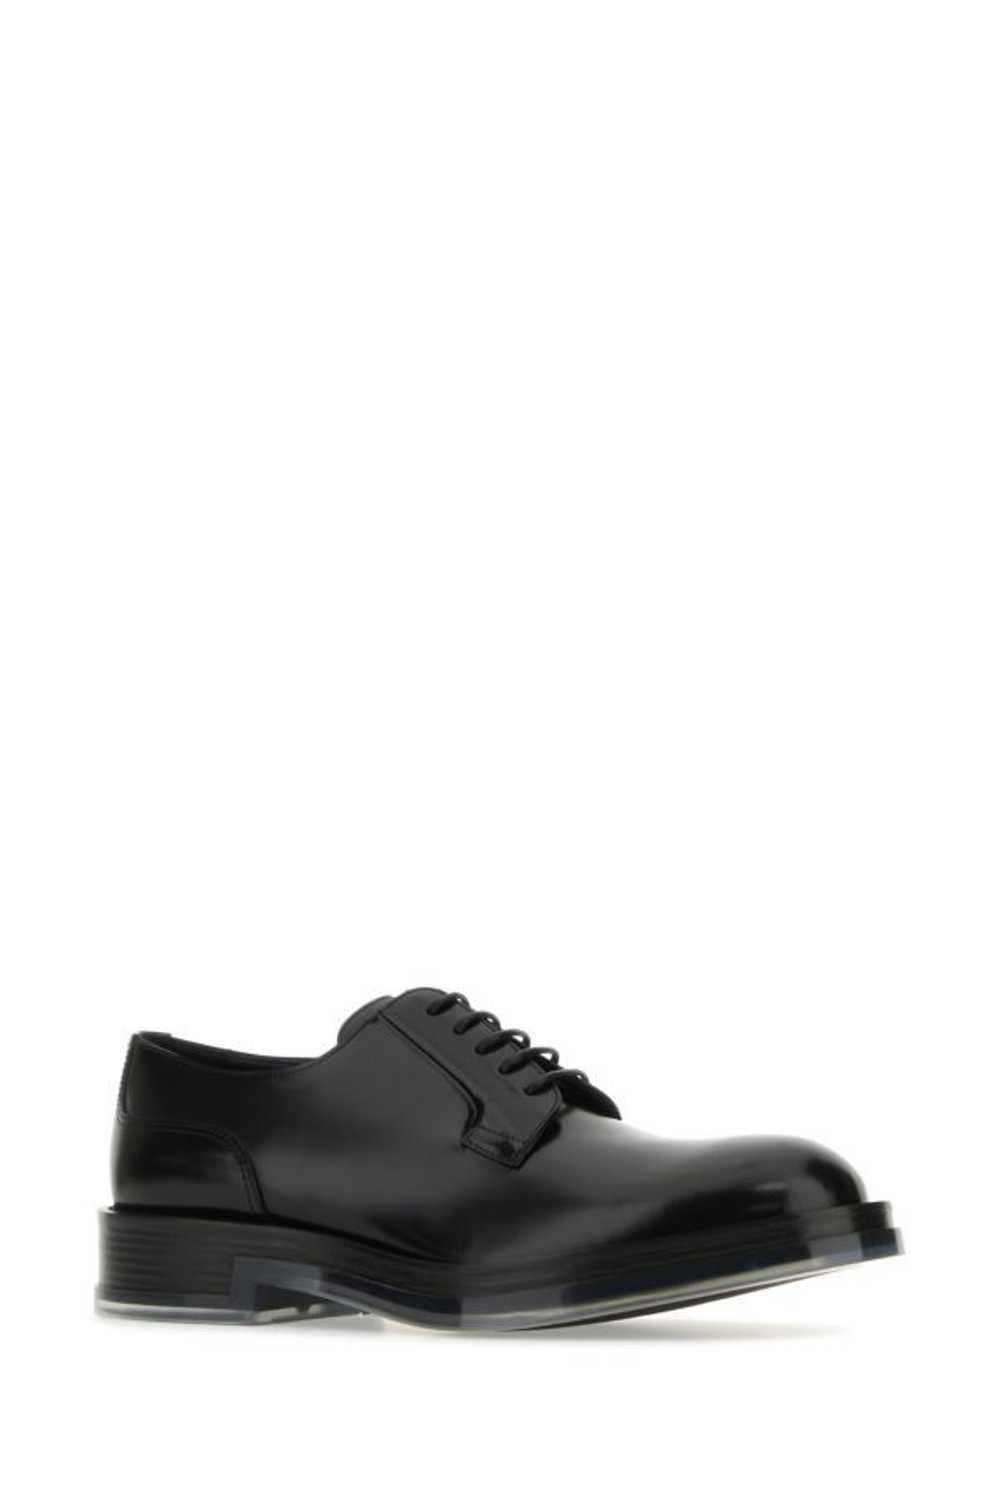 Alexander McQueen Black Leather Float Lace-Up Sho… - image 4